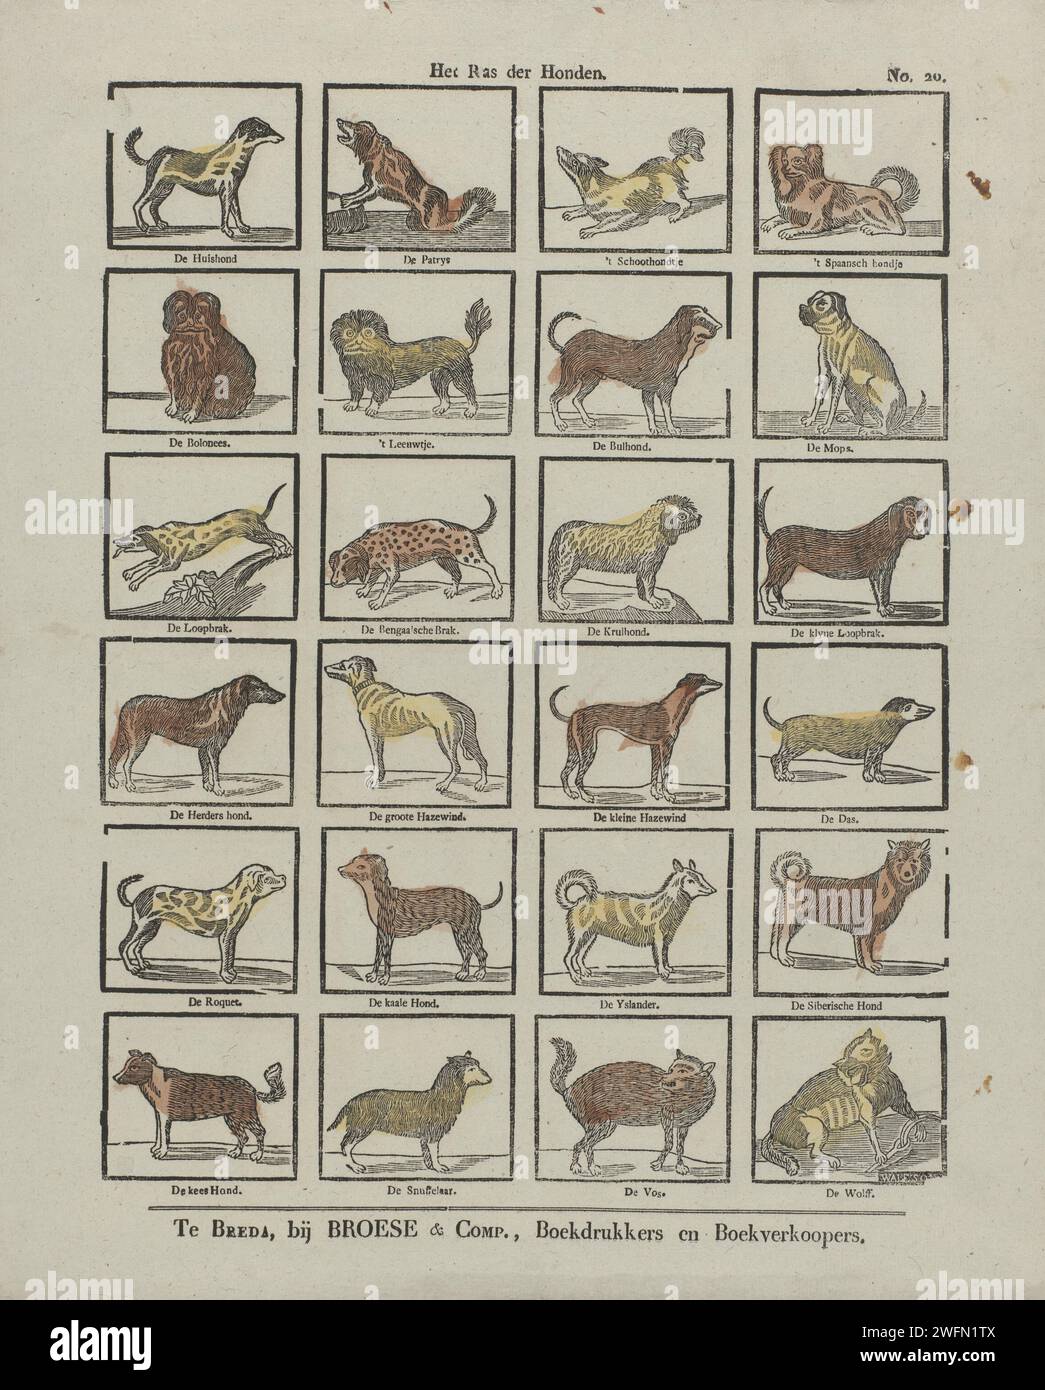 Het Ras der Dogs, Johannis Waleson, 1828 - 1853 print Leaf with 24 performances of various dog breeds, including the house dog, 't Schoothondje and the pugs. Under each image the breed name. Numbered at the top right: No. 20. Breda paper letterpress printing dog Stock Photo